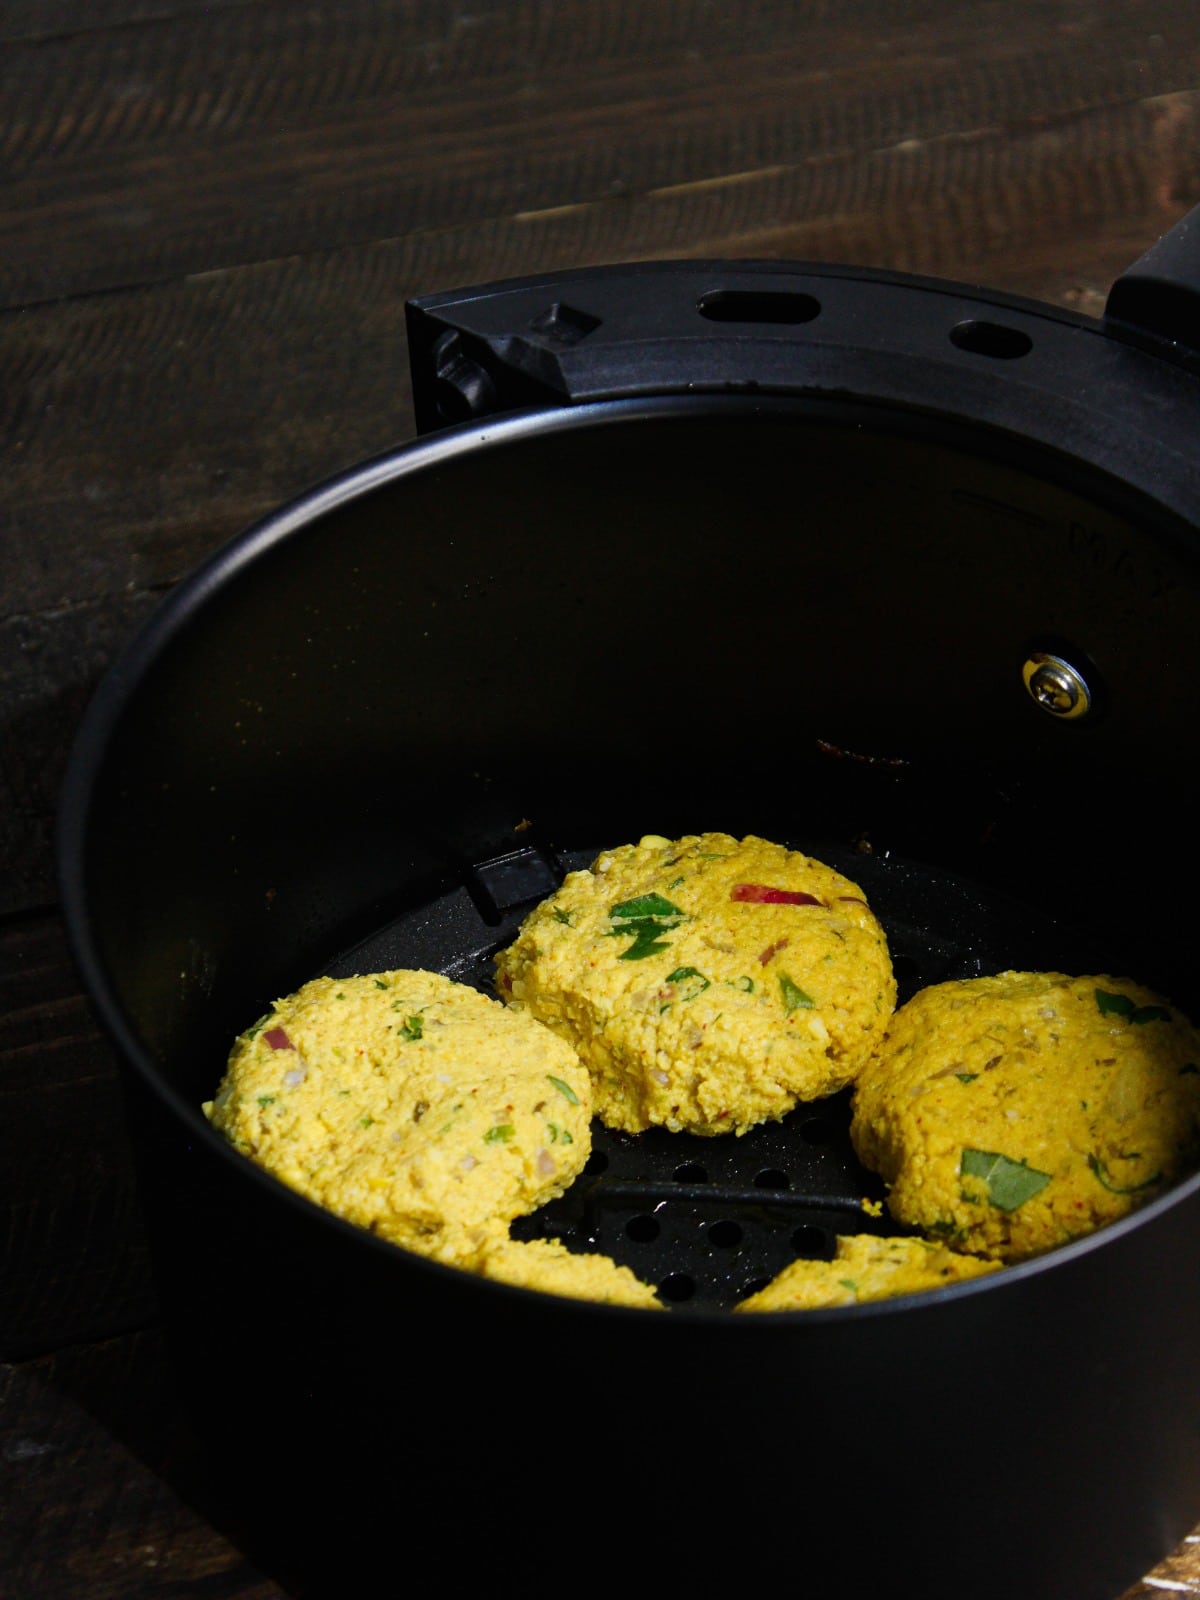 Make small small vadas out of the mixture and then place it into fryer basket and cook